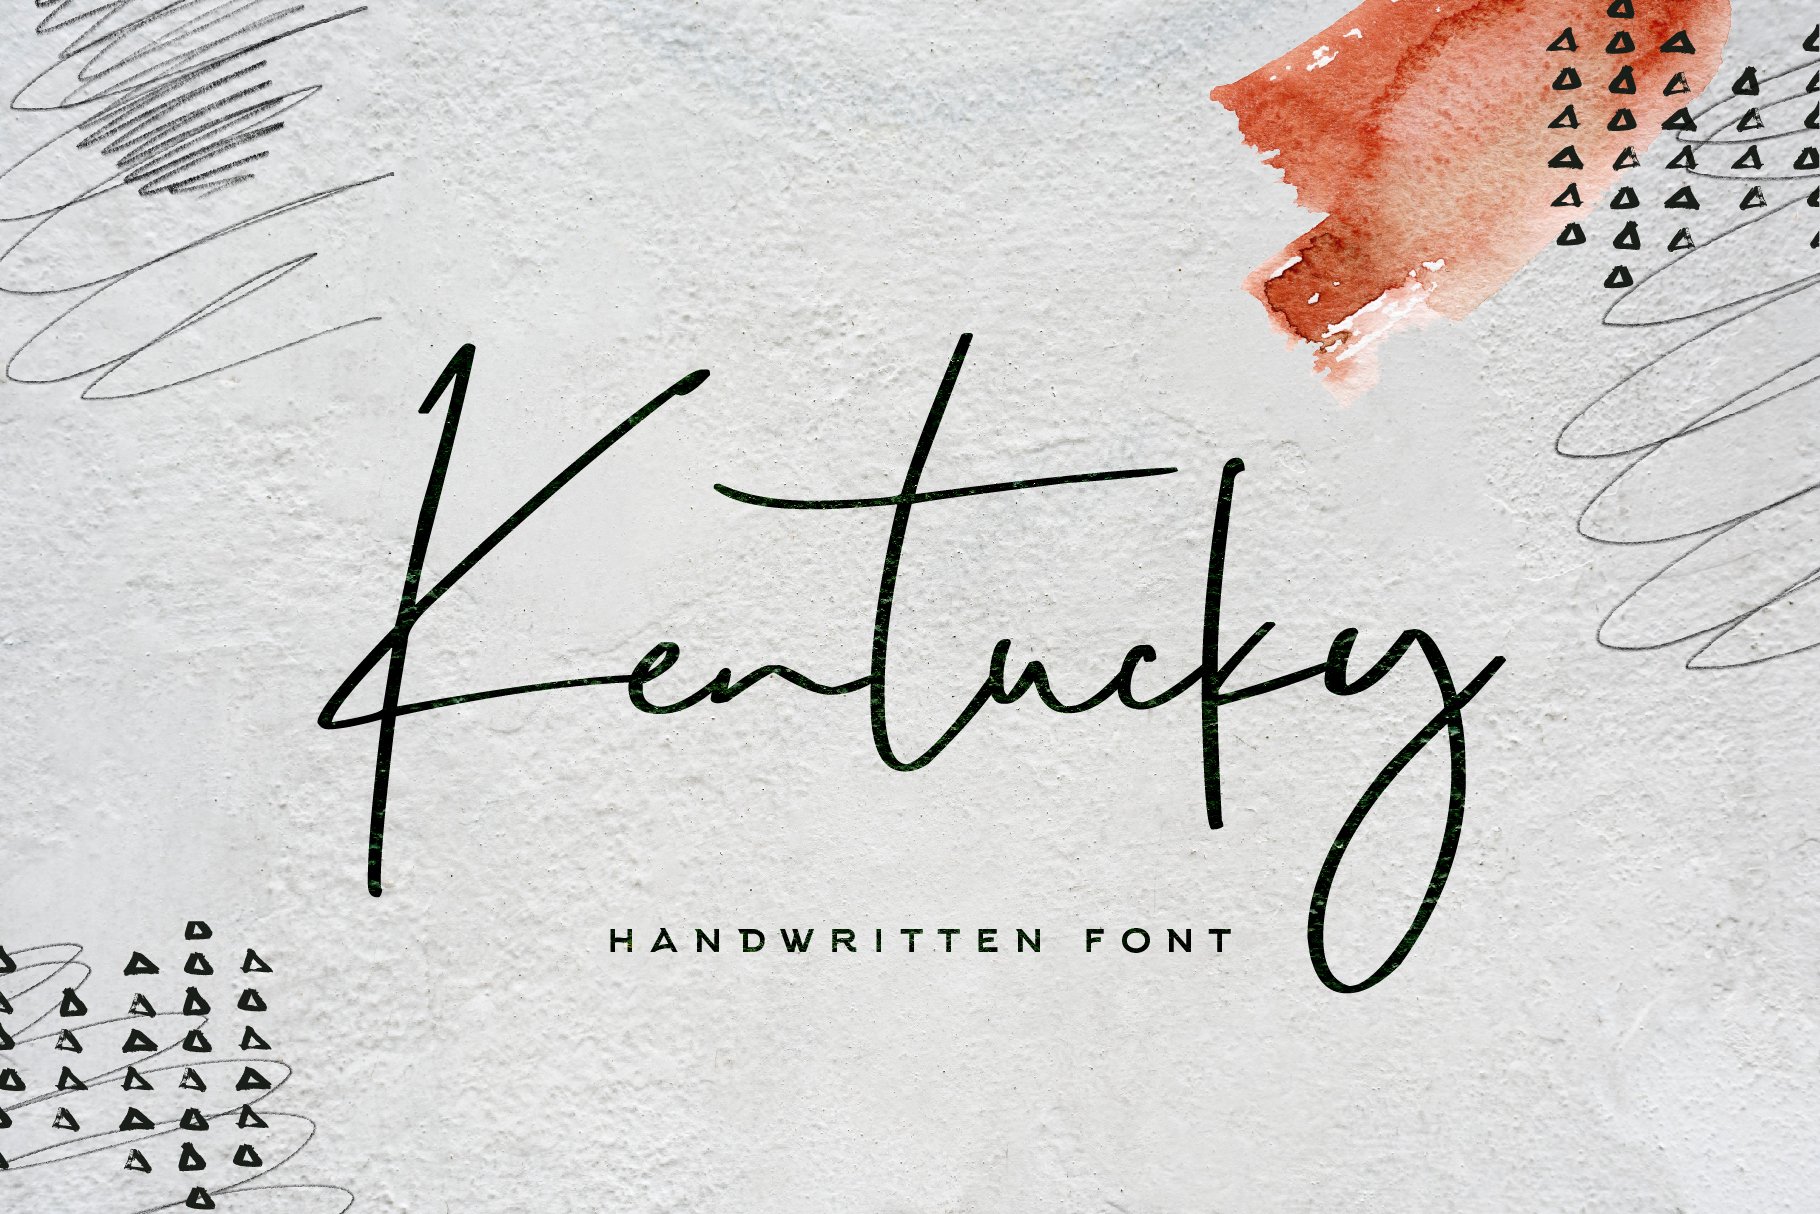 Kentucky Font cover image.